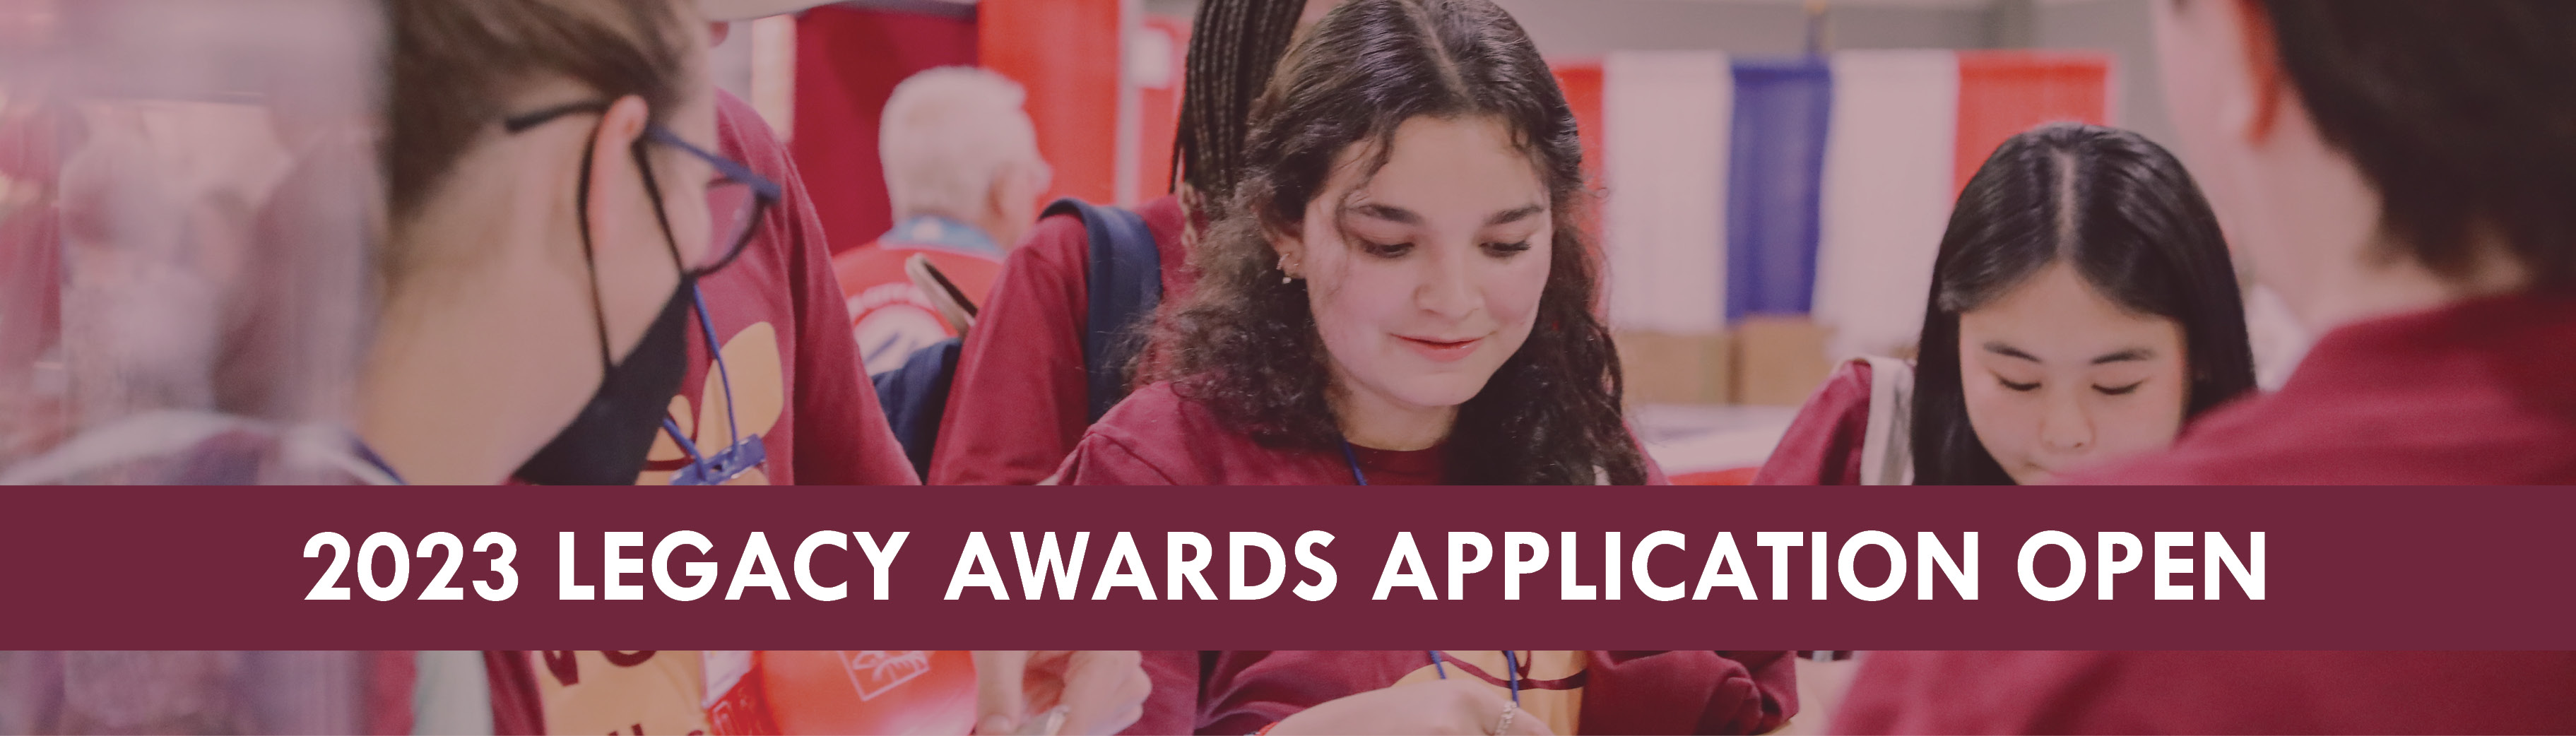 Legacy Awards Applications Open!